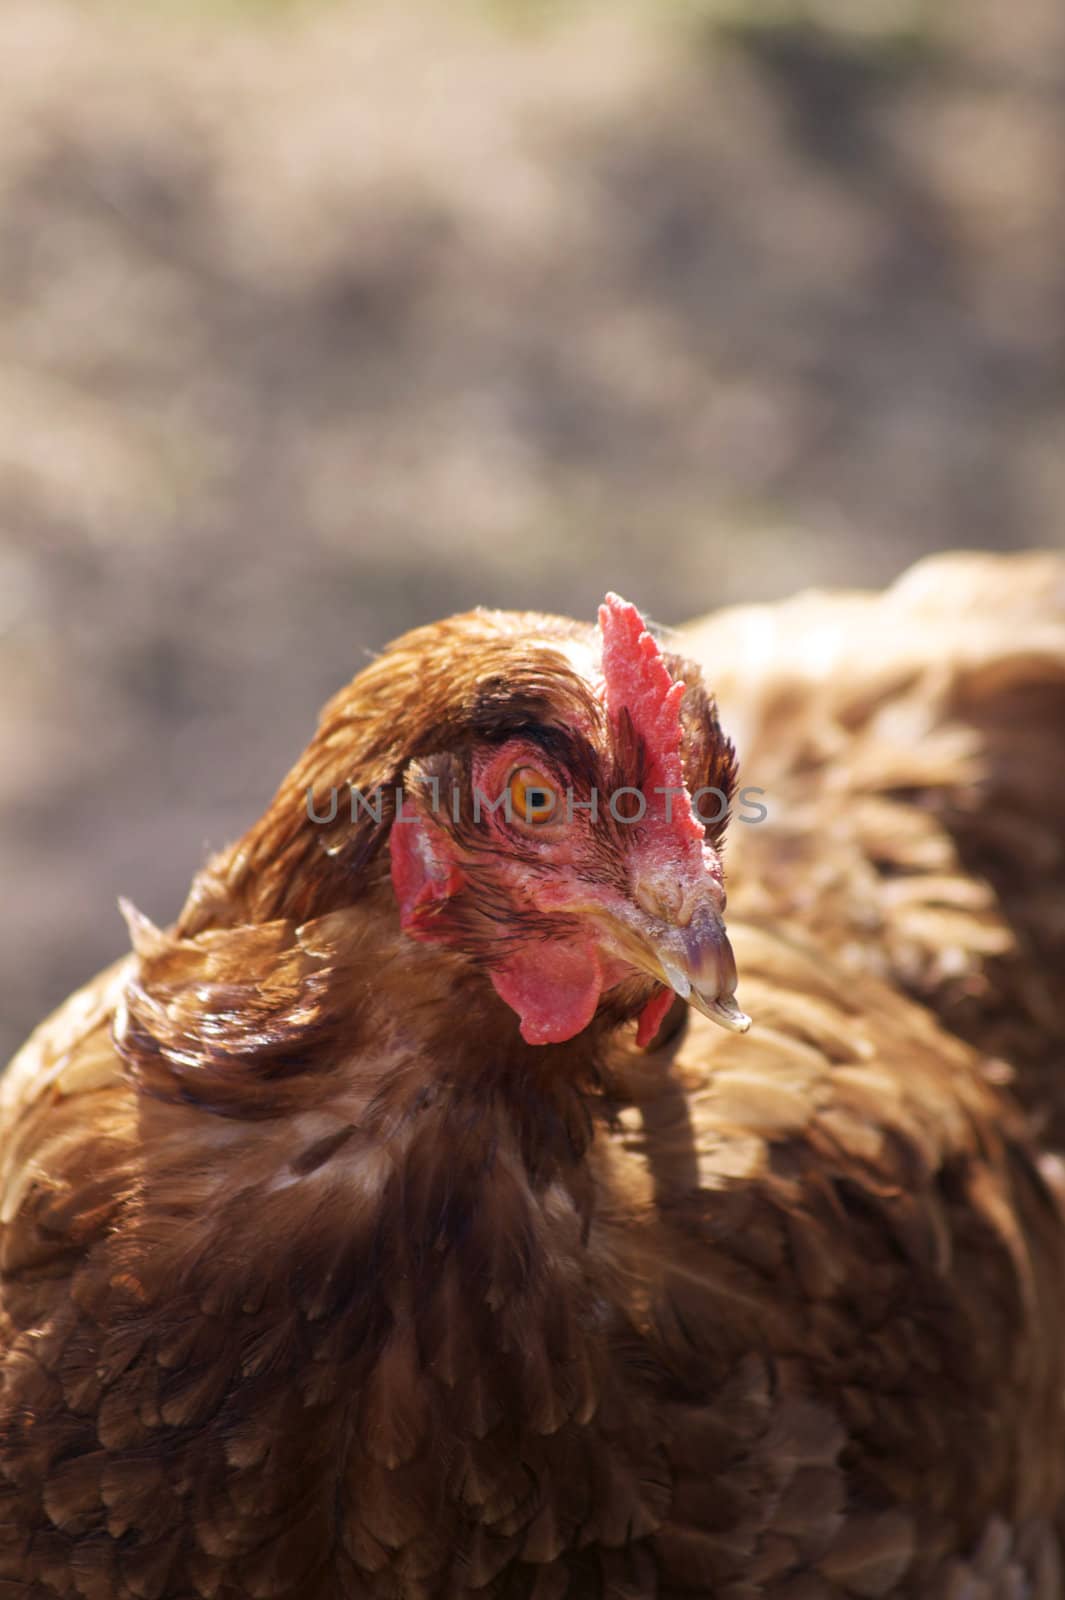 A single female brown feathered chicken with a clipped beak.